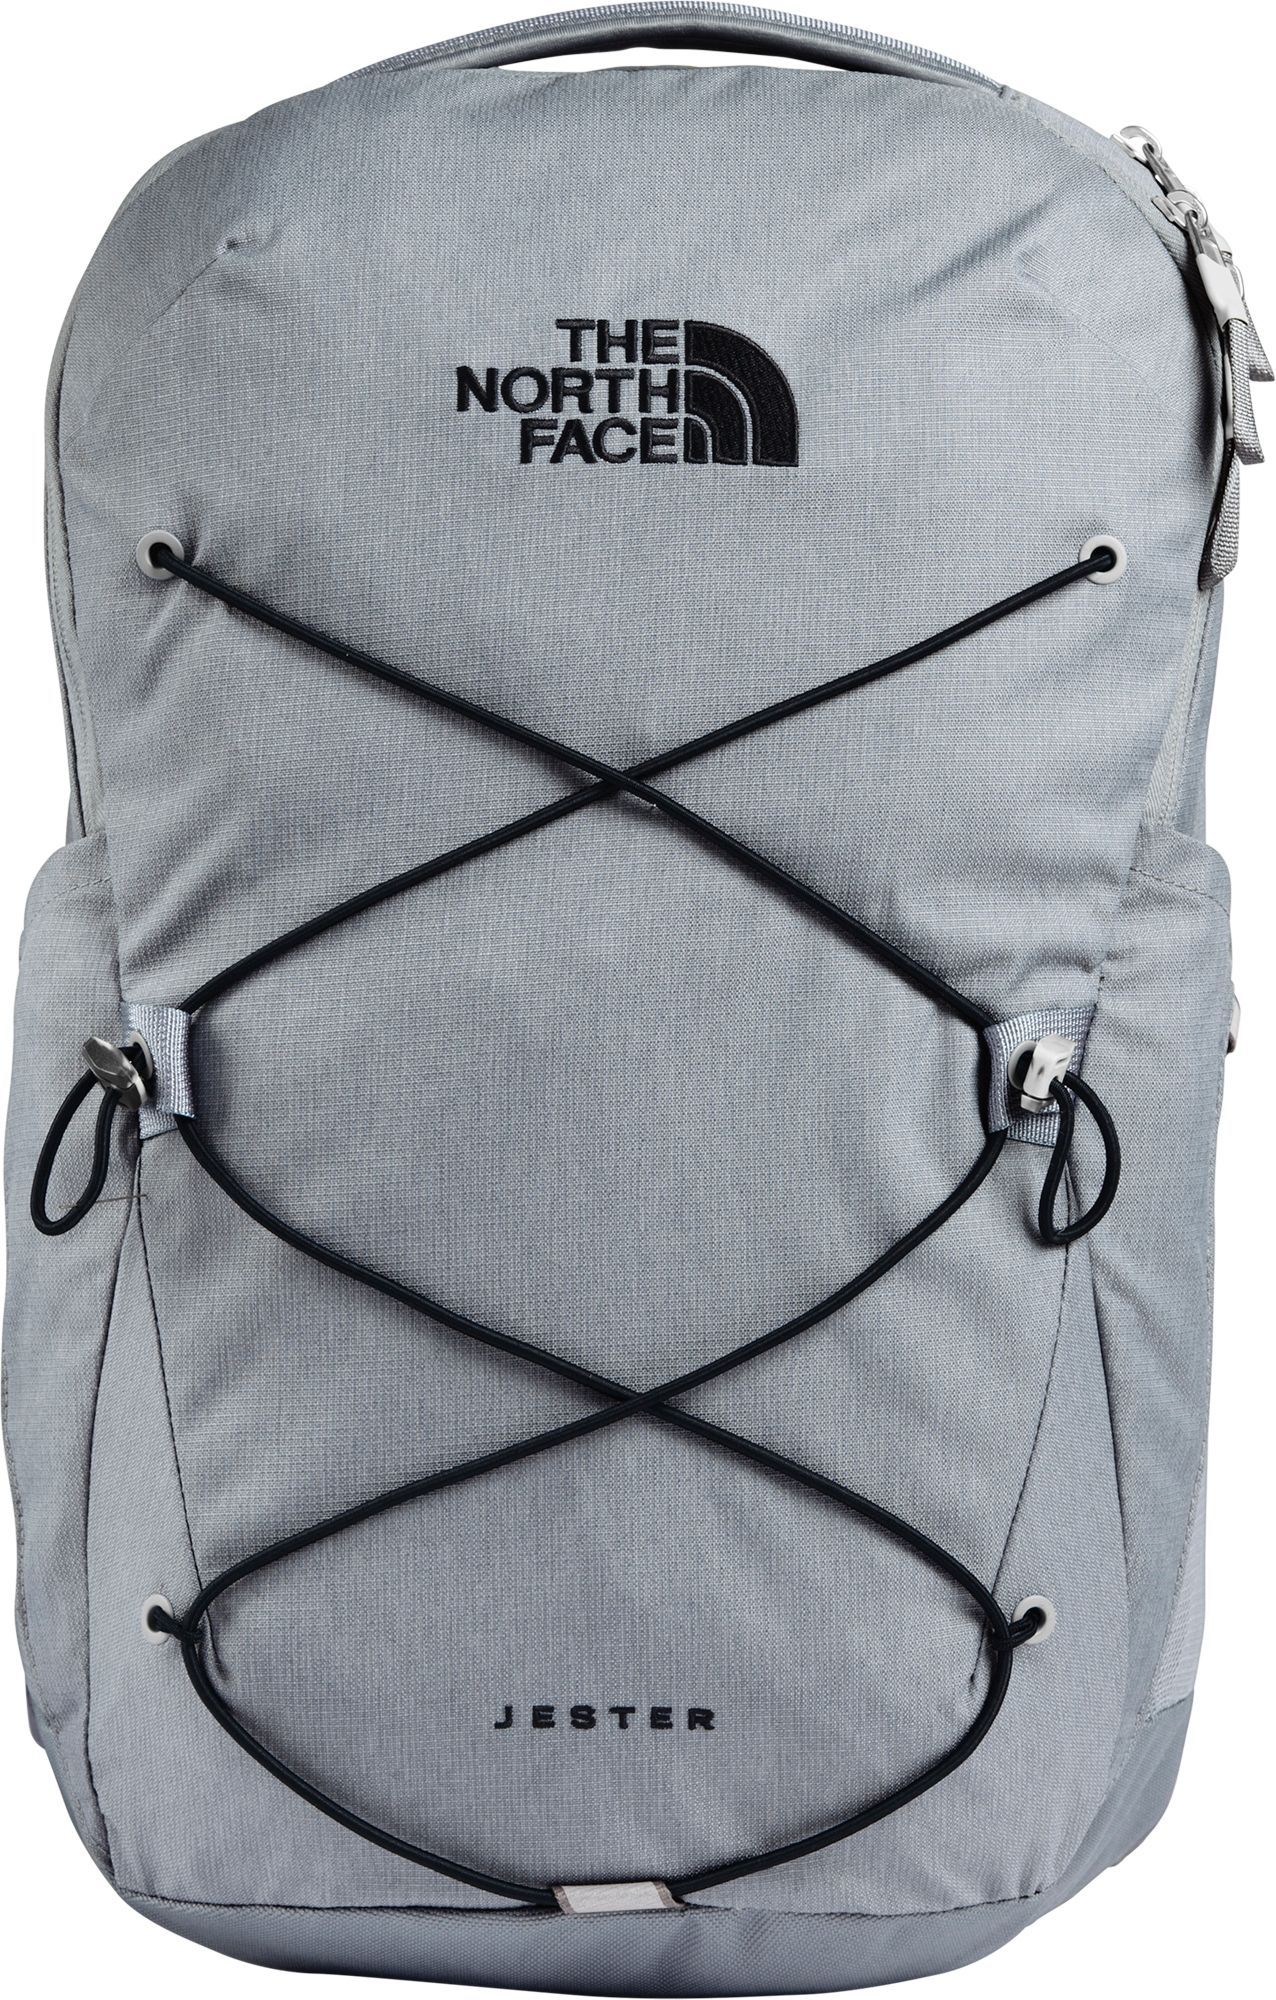 The North Face Jester Backpack, Men's, Mid Gry Dk Htr/Tnf Blk | Dick's Sporting Goods